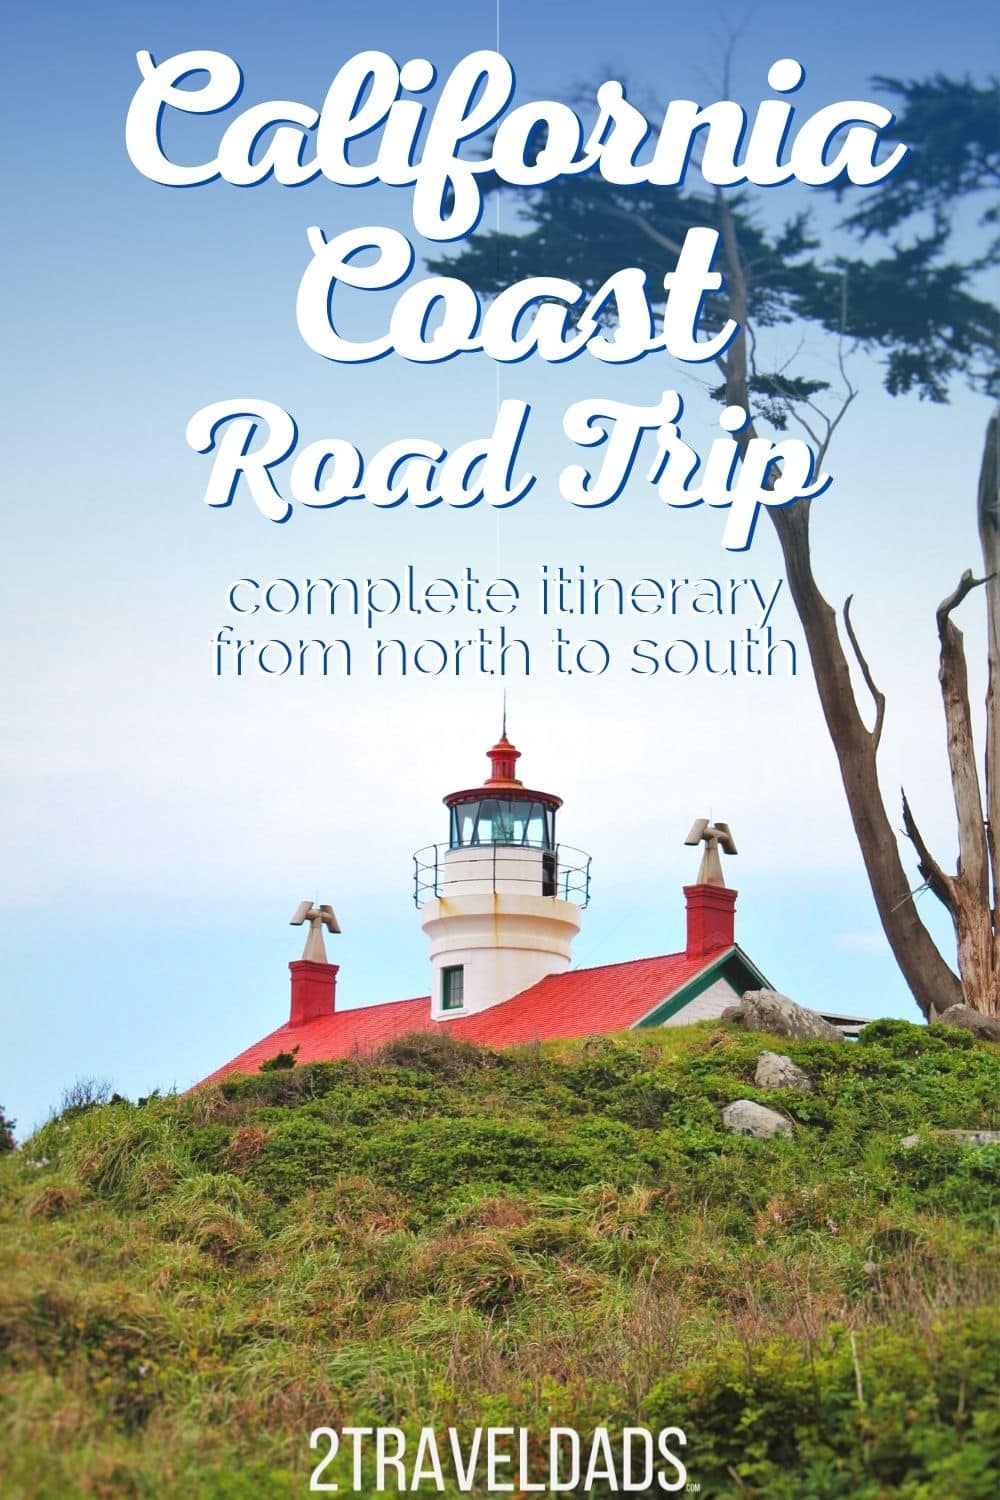 Complete California Coast road trip plan from North to South. 7 Day itinerary for the Pacific Coast Highway drive on Highway 1. Best stops on the California Coast in Big Sur, San Francisco, the Redwoods and more.